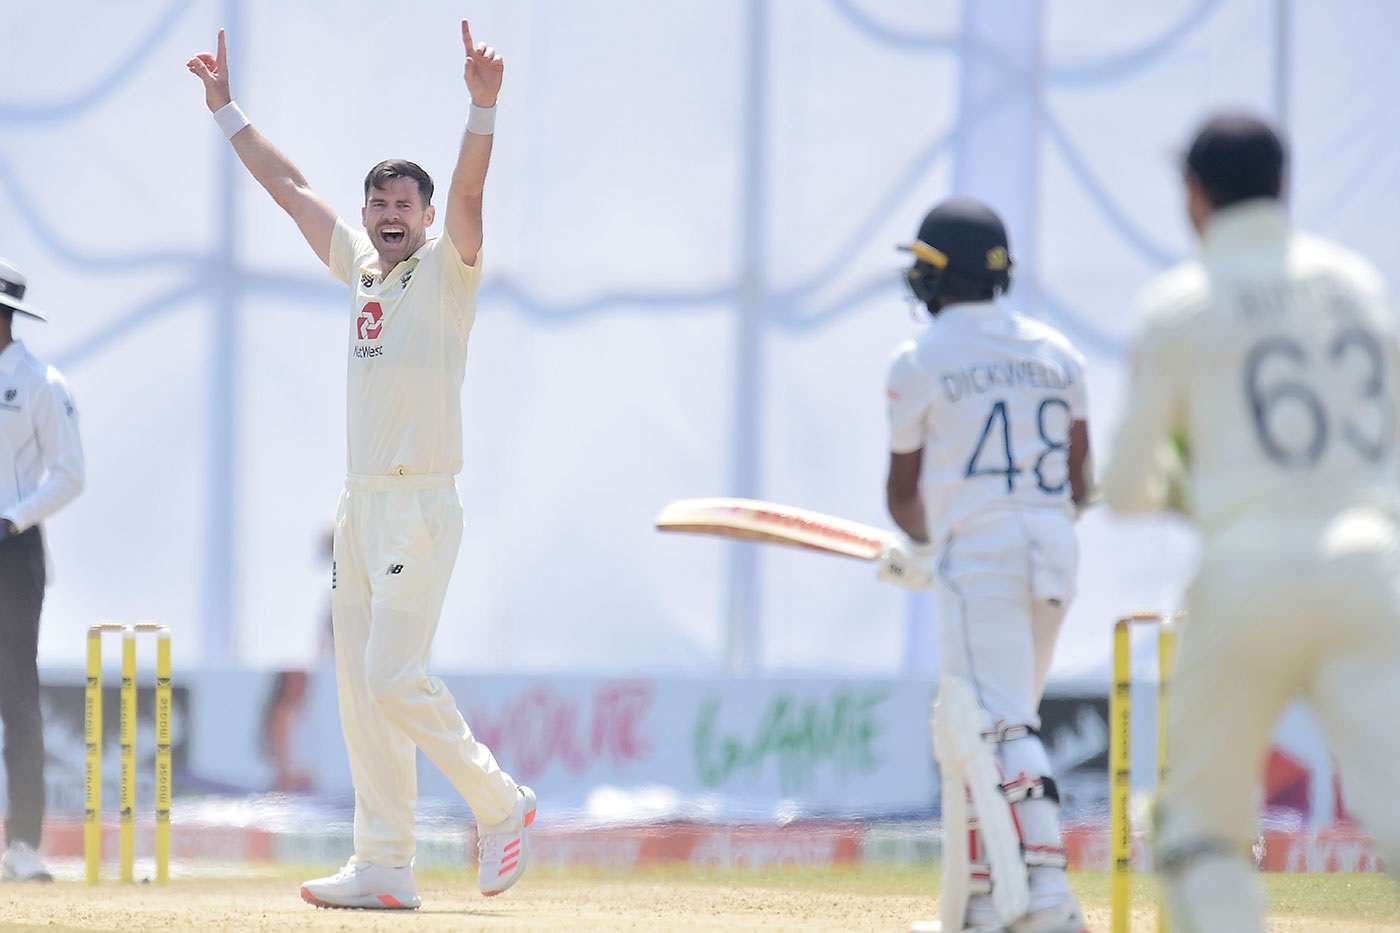 Anderson six-for keeps Sri Lanka in check